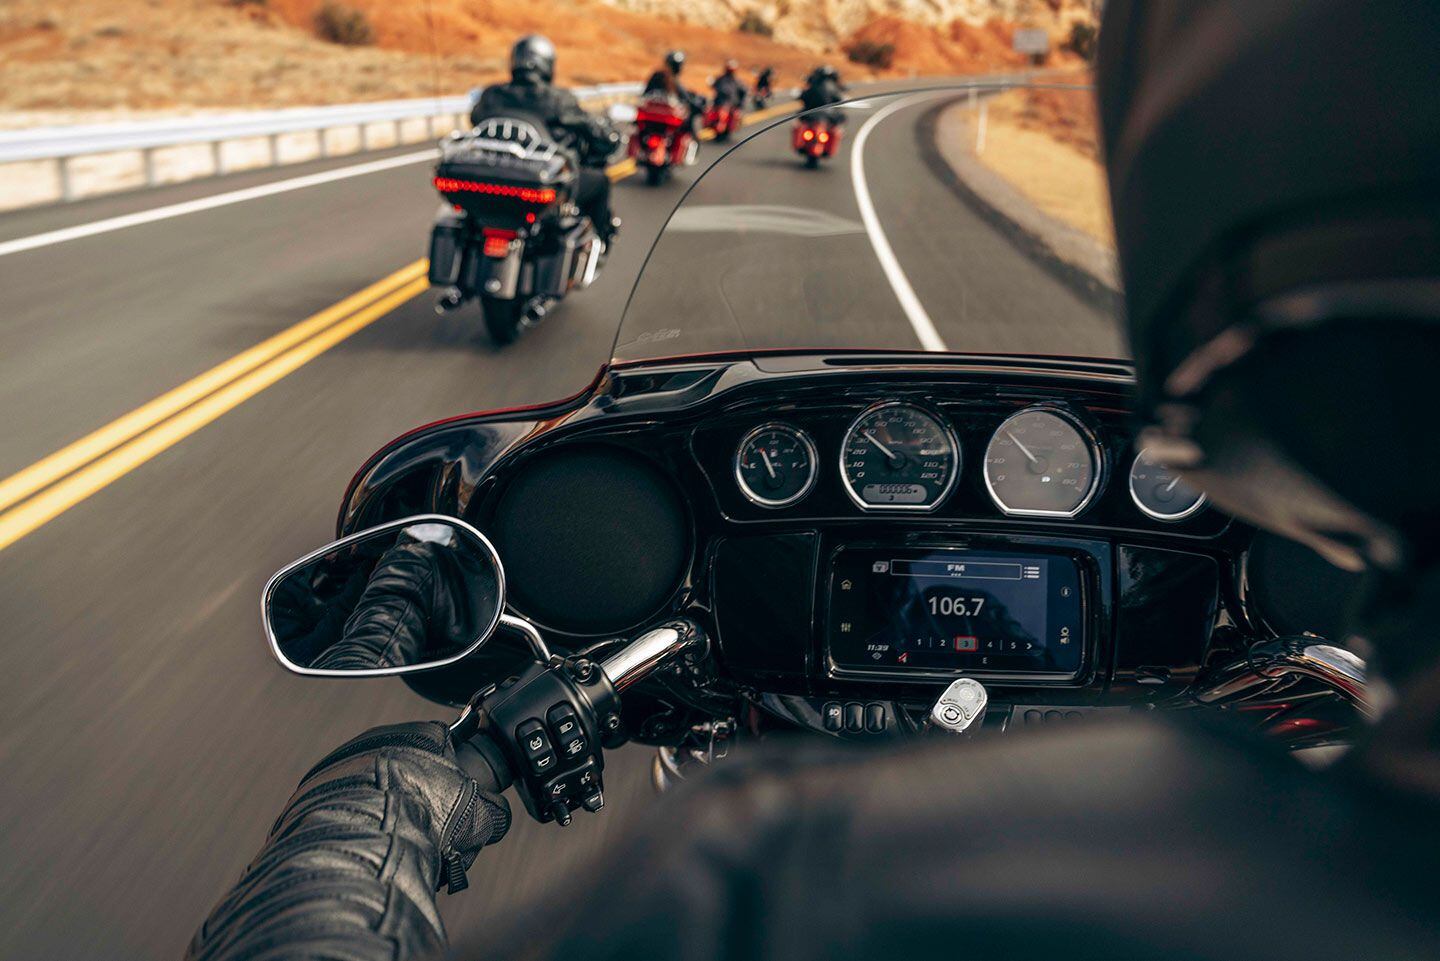 Joining the ride is free, and riders can get downloadable H-D Ride Planner information on Harley’s site.